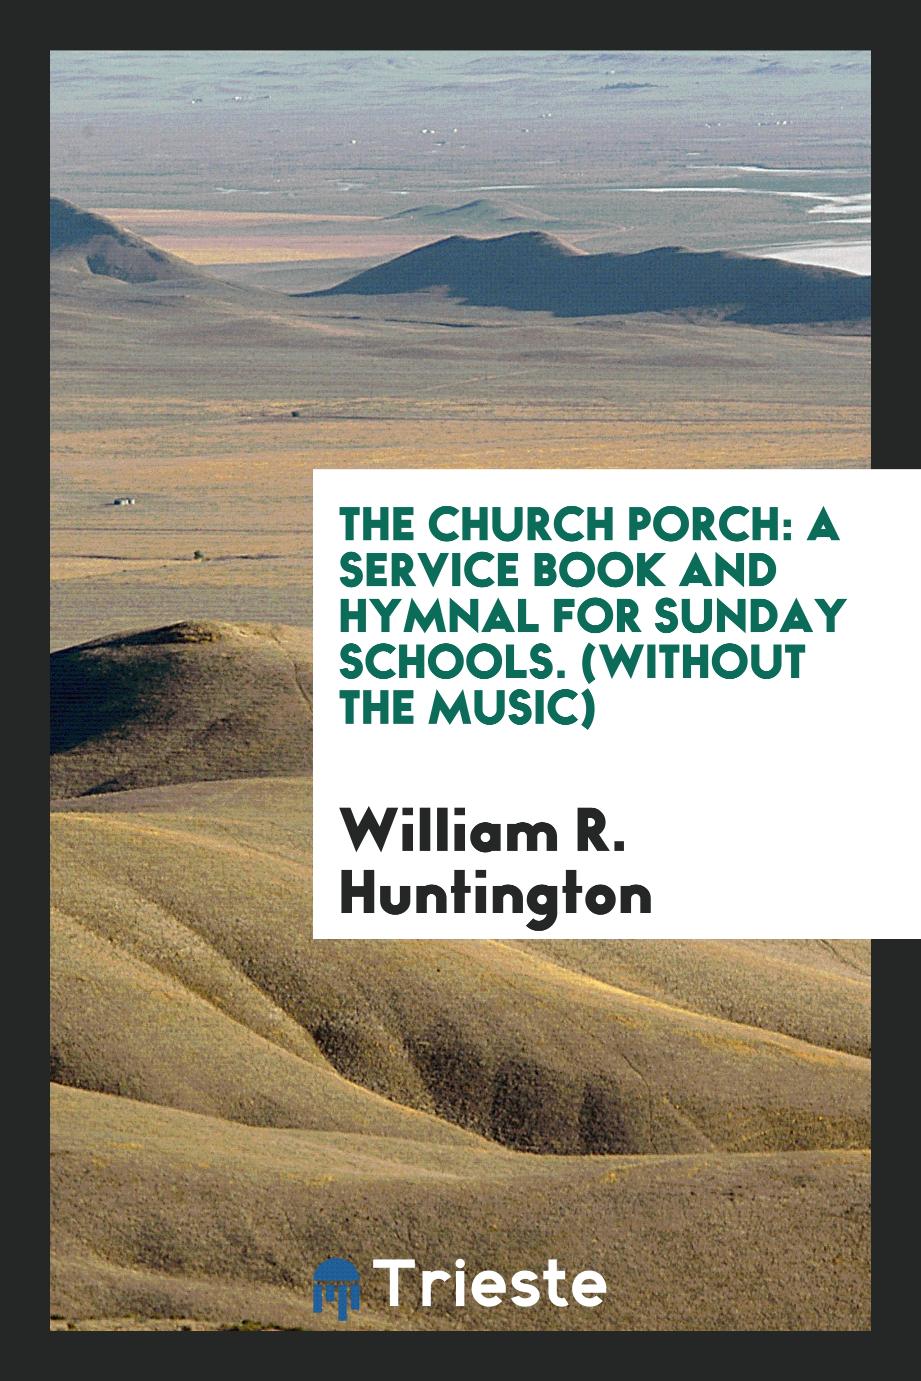 The Church Porch: A Service Book and Hymnal for Sunday Schools. (Without the Music)